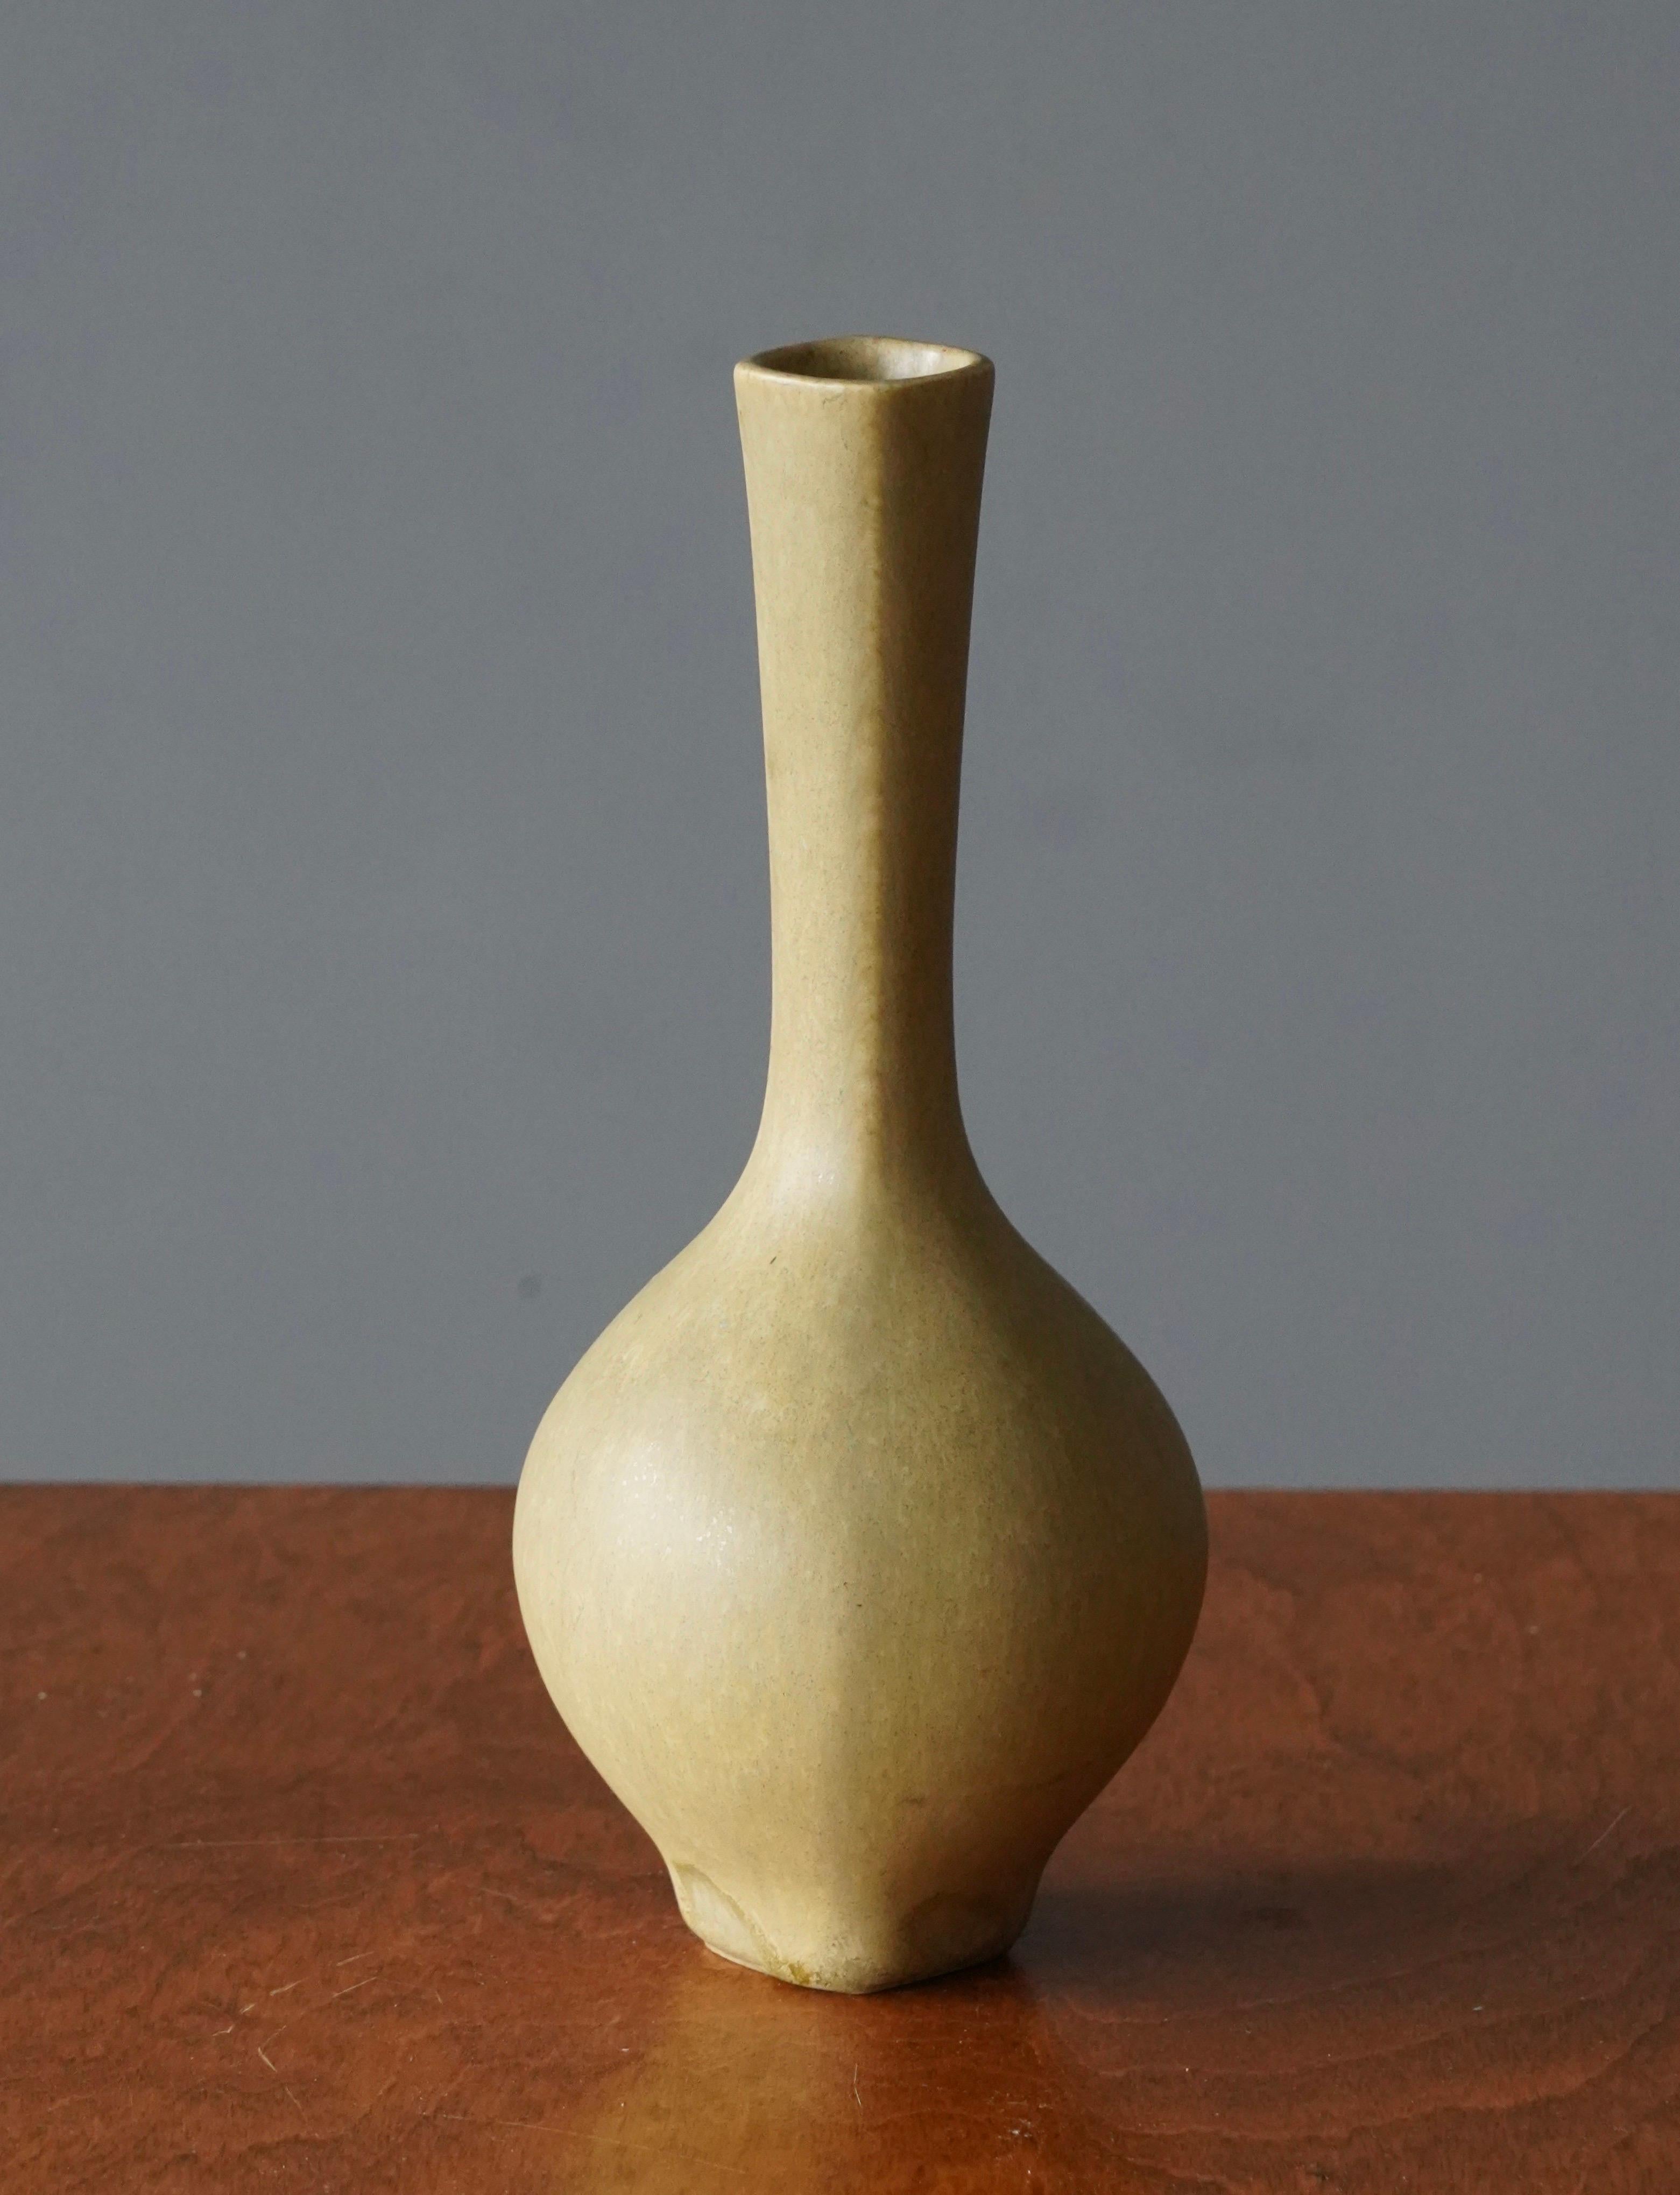 A vase by Berndt Friberg, from the 